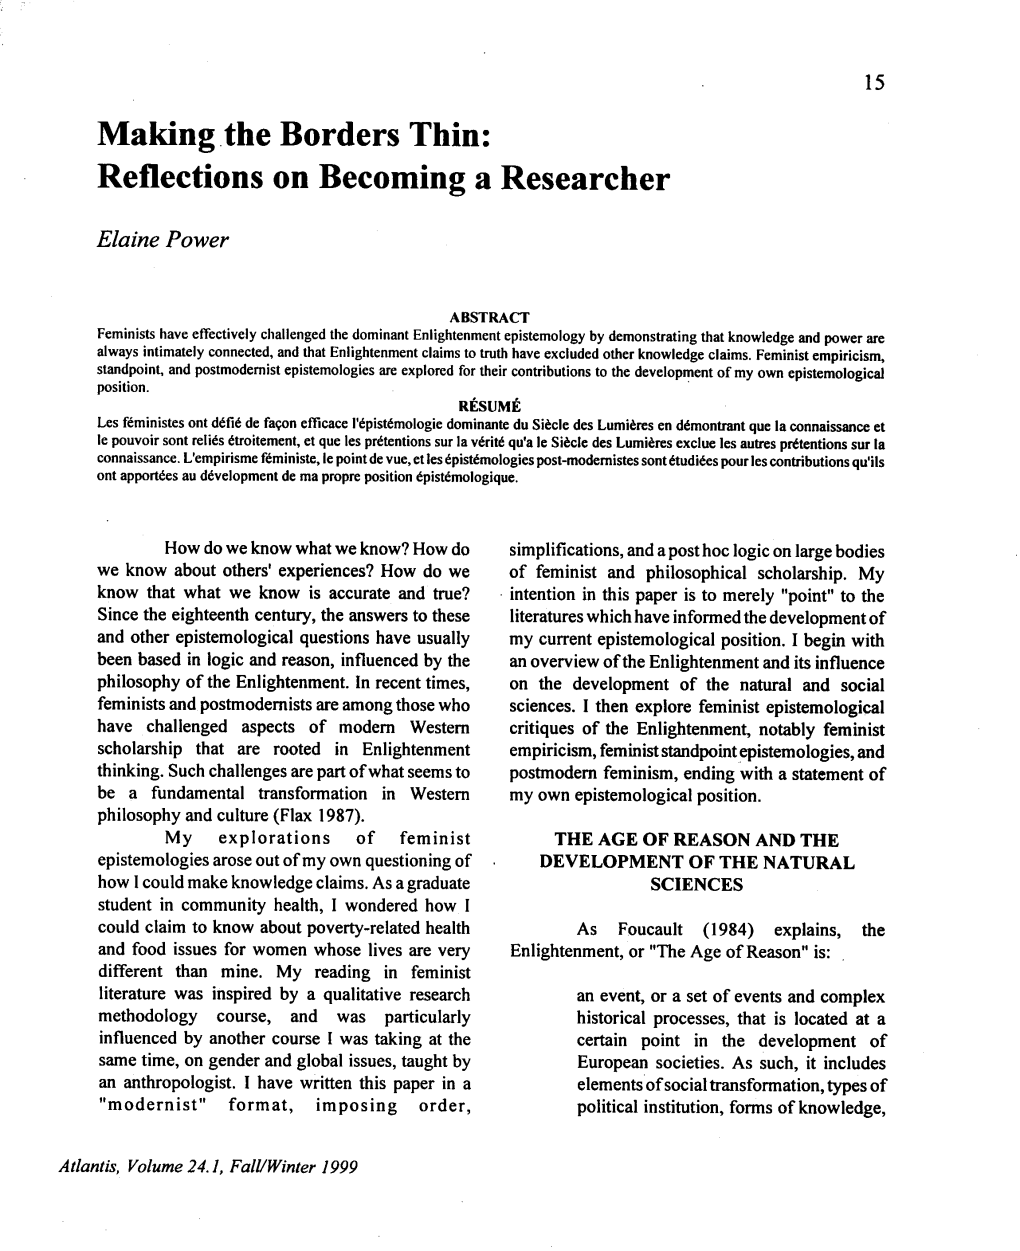 Reflections on Becoming a Researcher